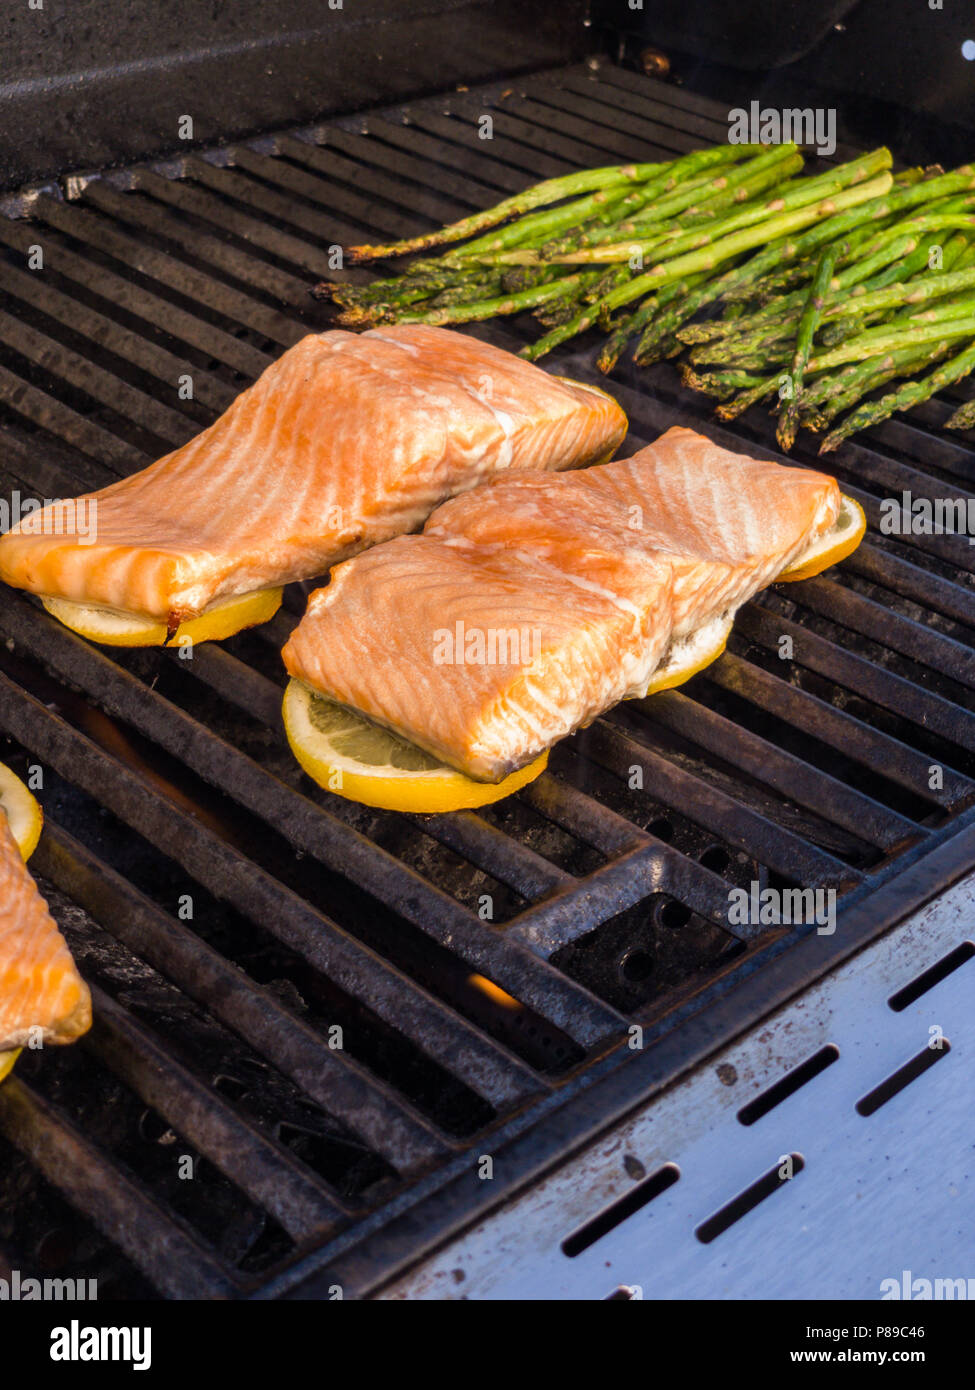 Step by step. Grilling salmon with lemons on outdooor gas grill Stock Photo  - Alamy